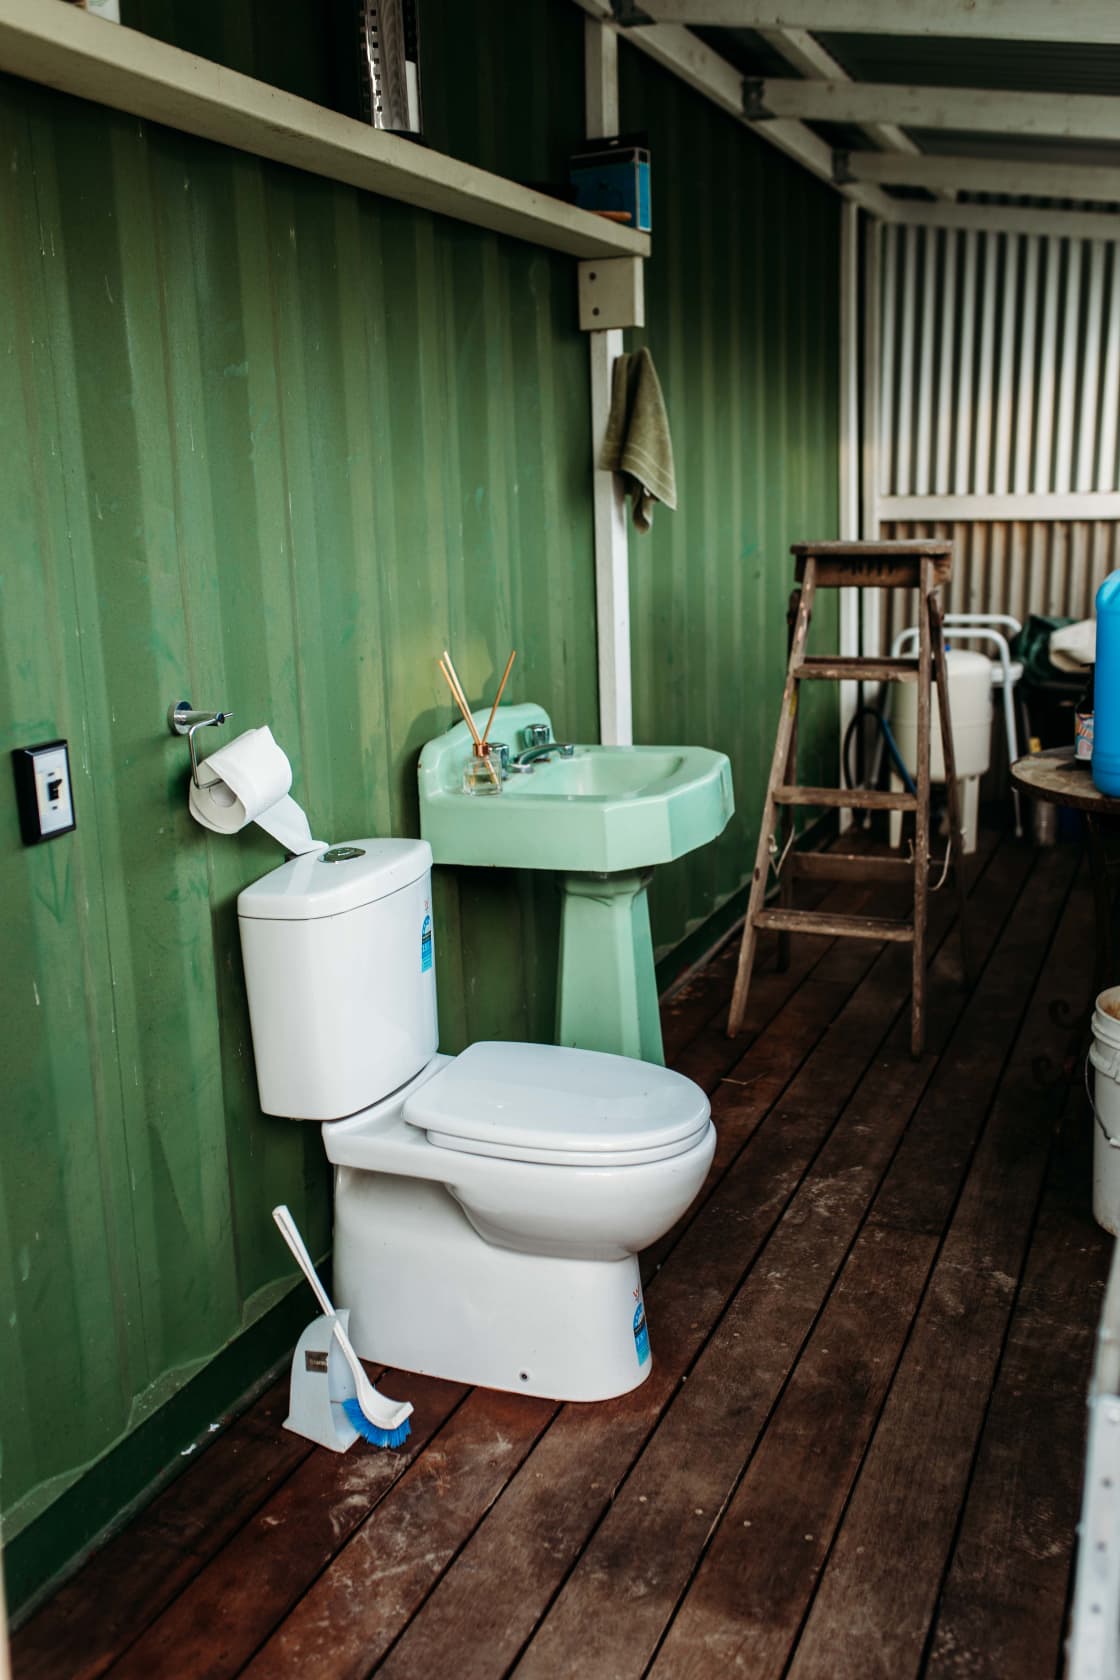 Outdoor toilet at the back of the barn